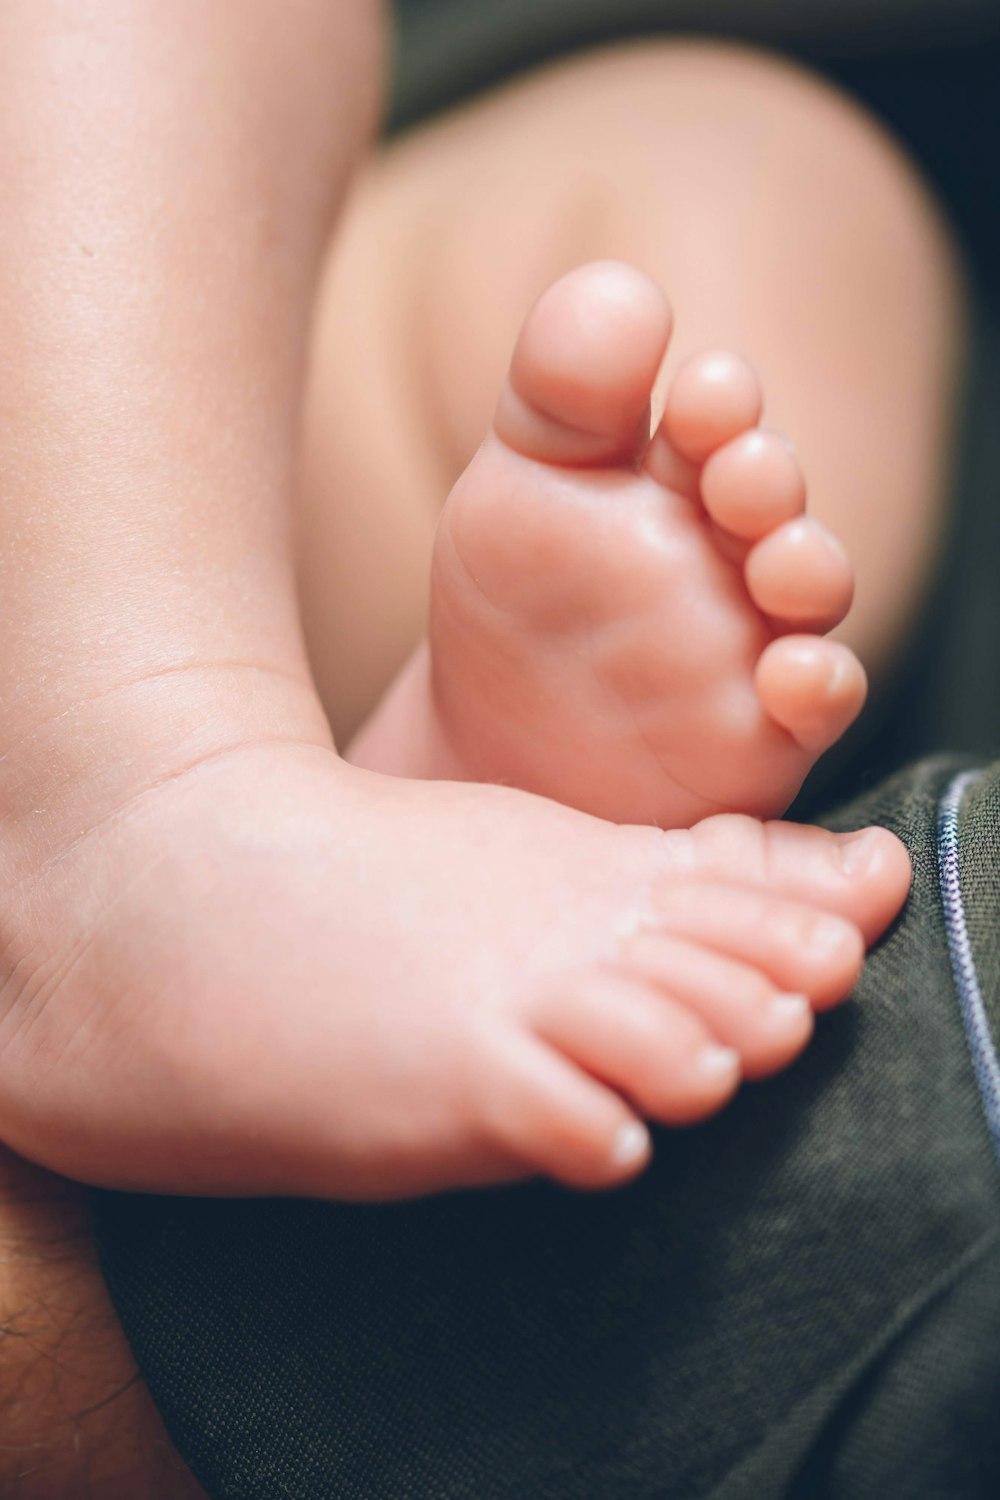 a close up of a baby's bare foot